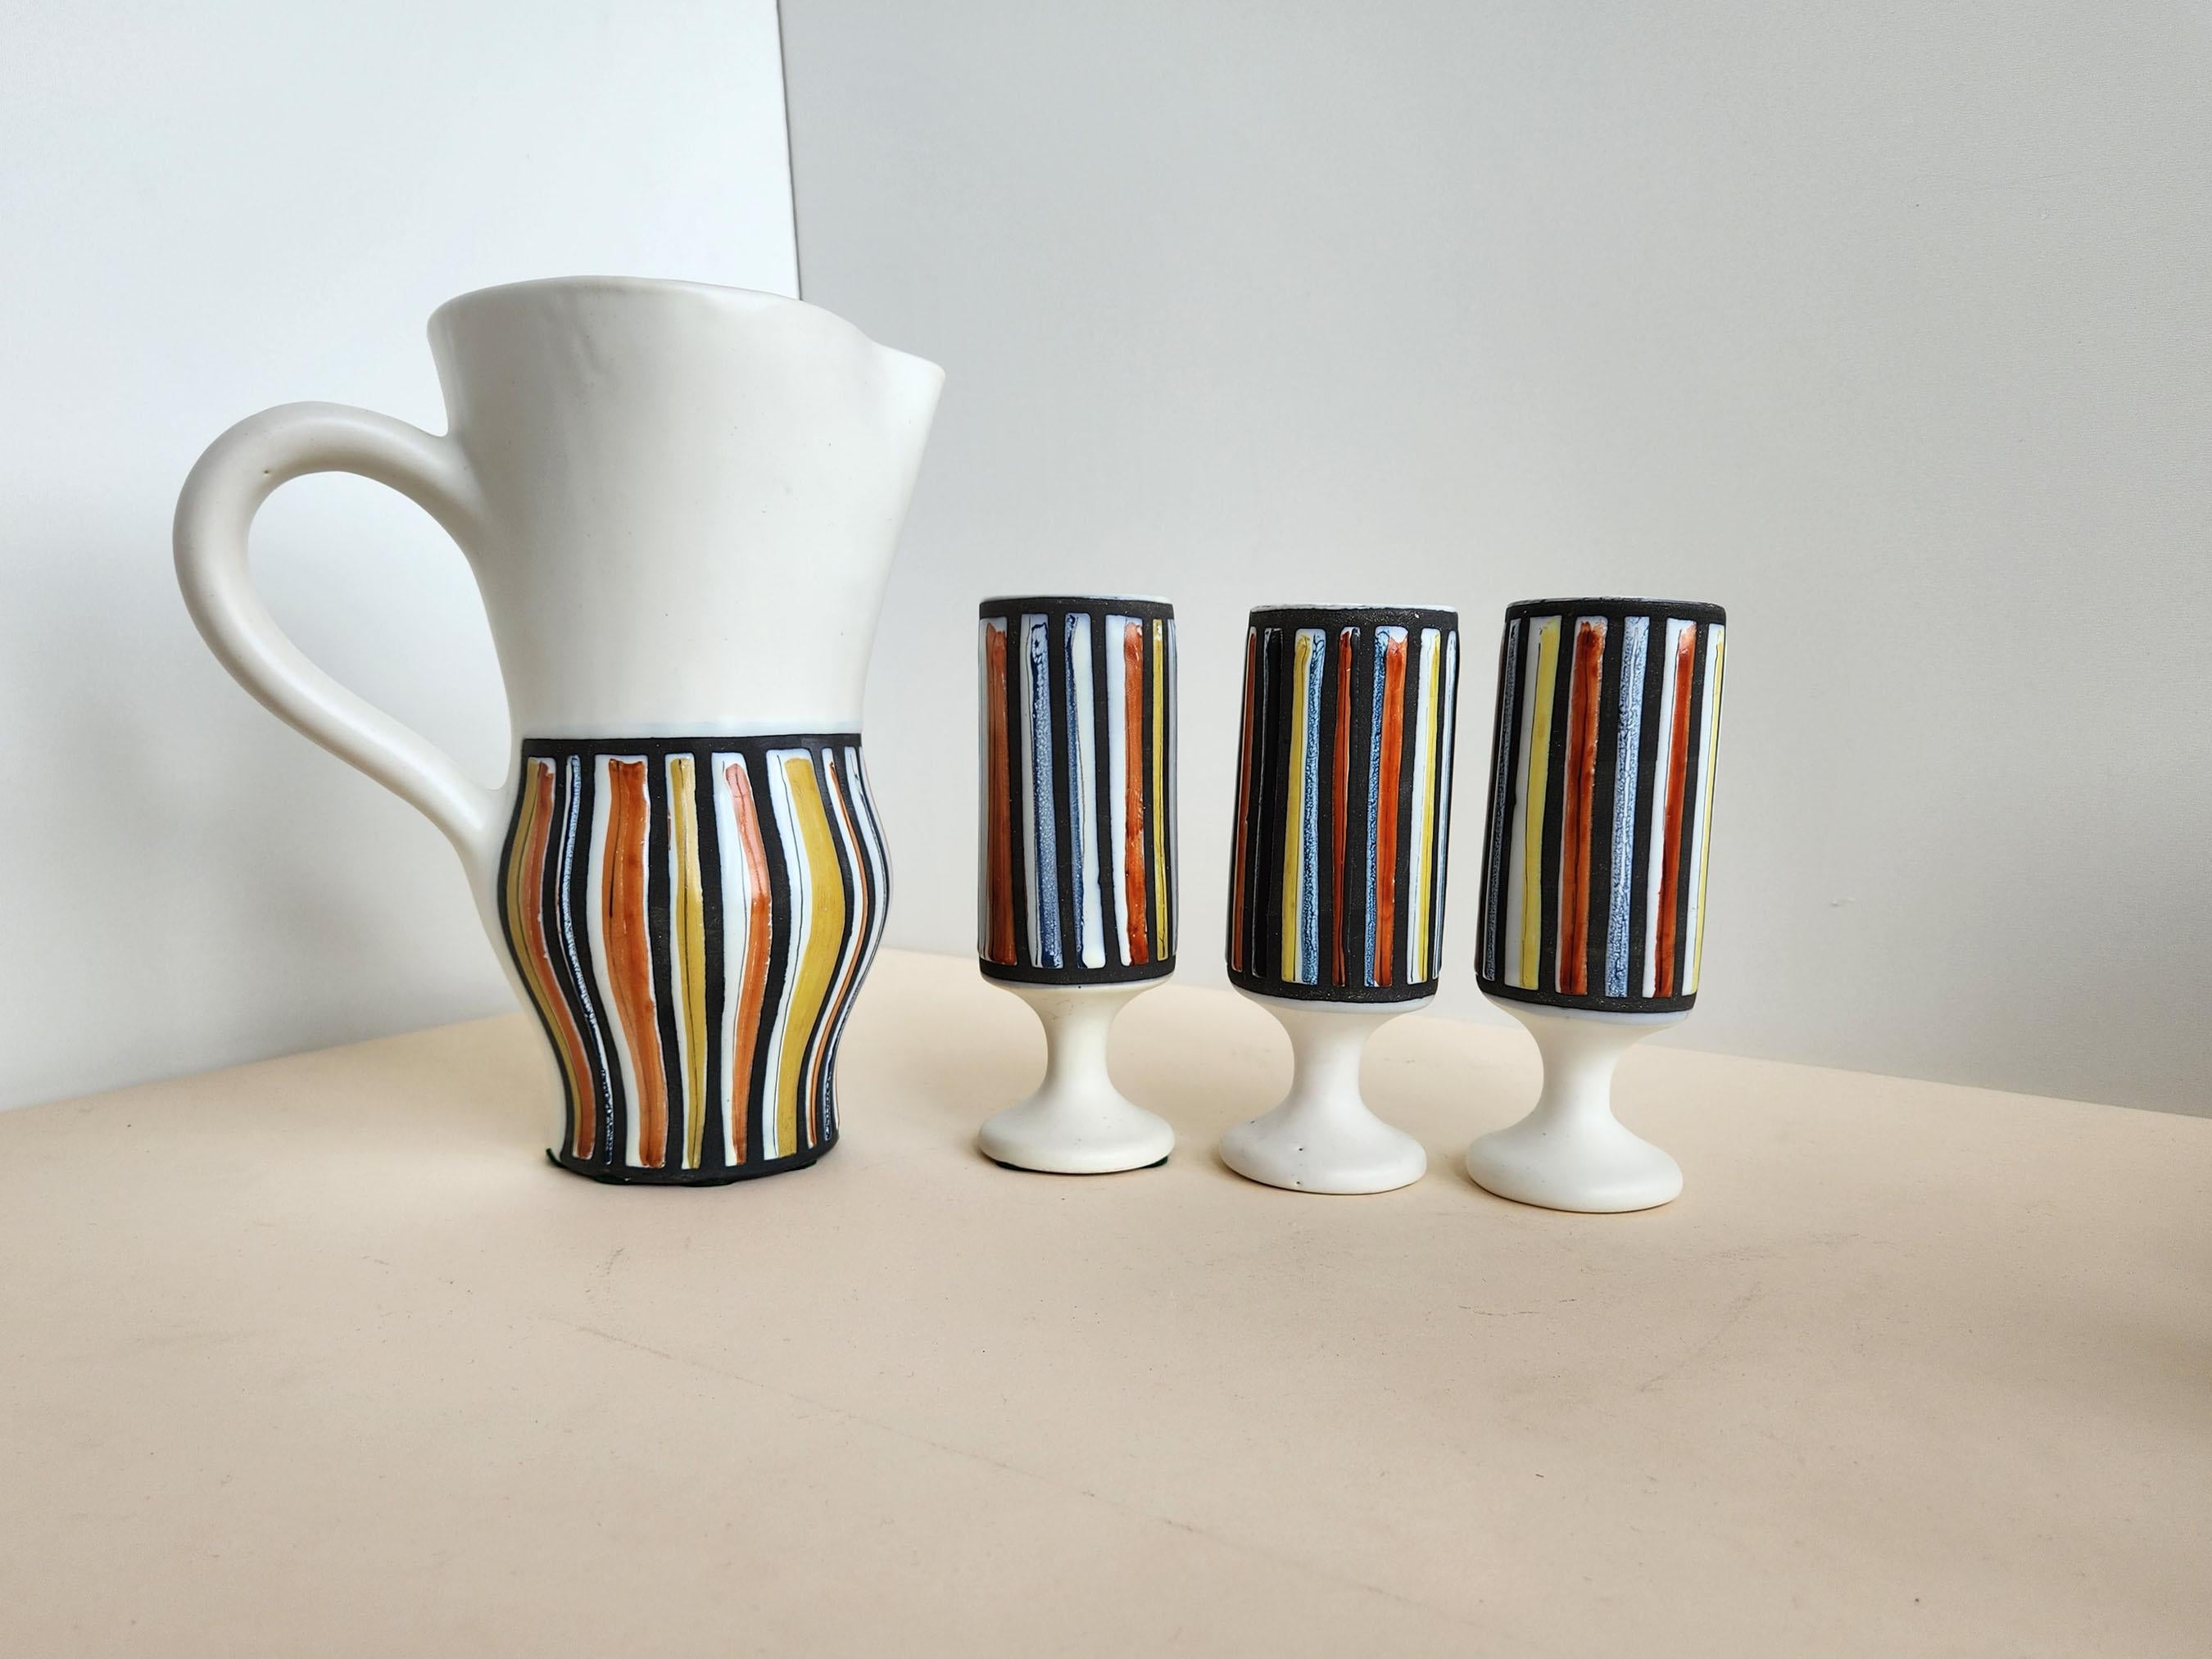 Vintage Ceramic Pitcher and 3 Goblets with Vertical Stripes signed by Roger Capron - Vallauris, France

Roger Capron was in influential French ceramicist, known for his tiled tables and his use of recurring motifs such as stylized branches and